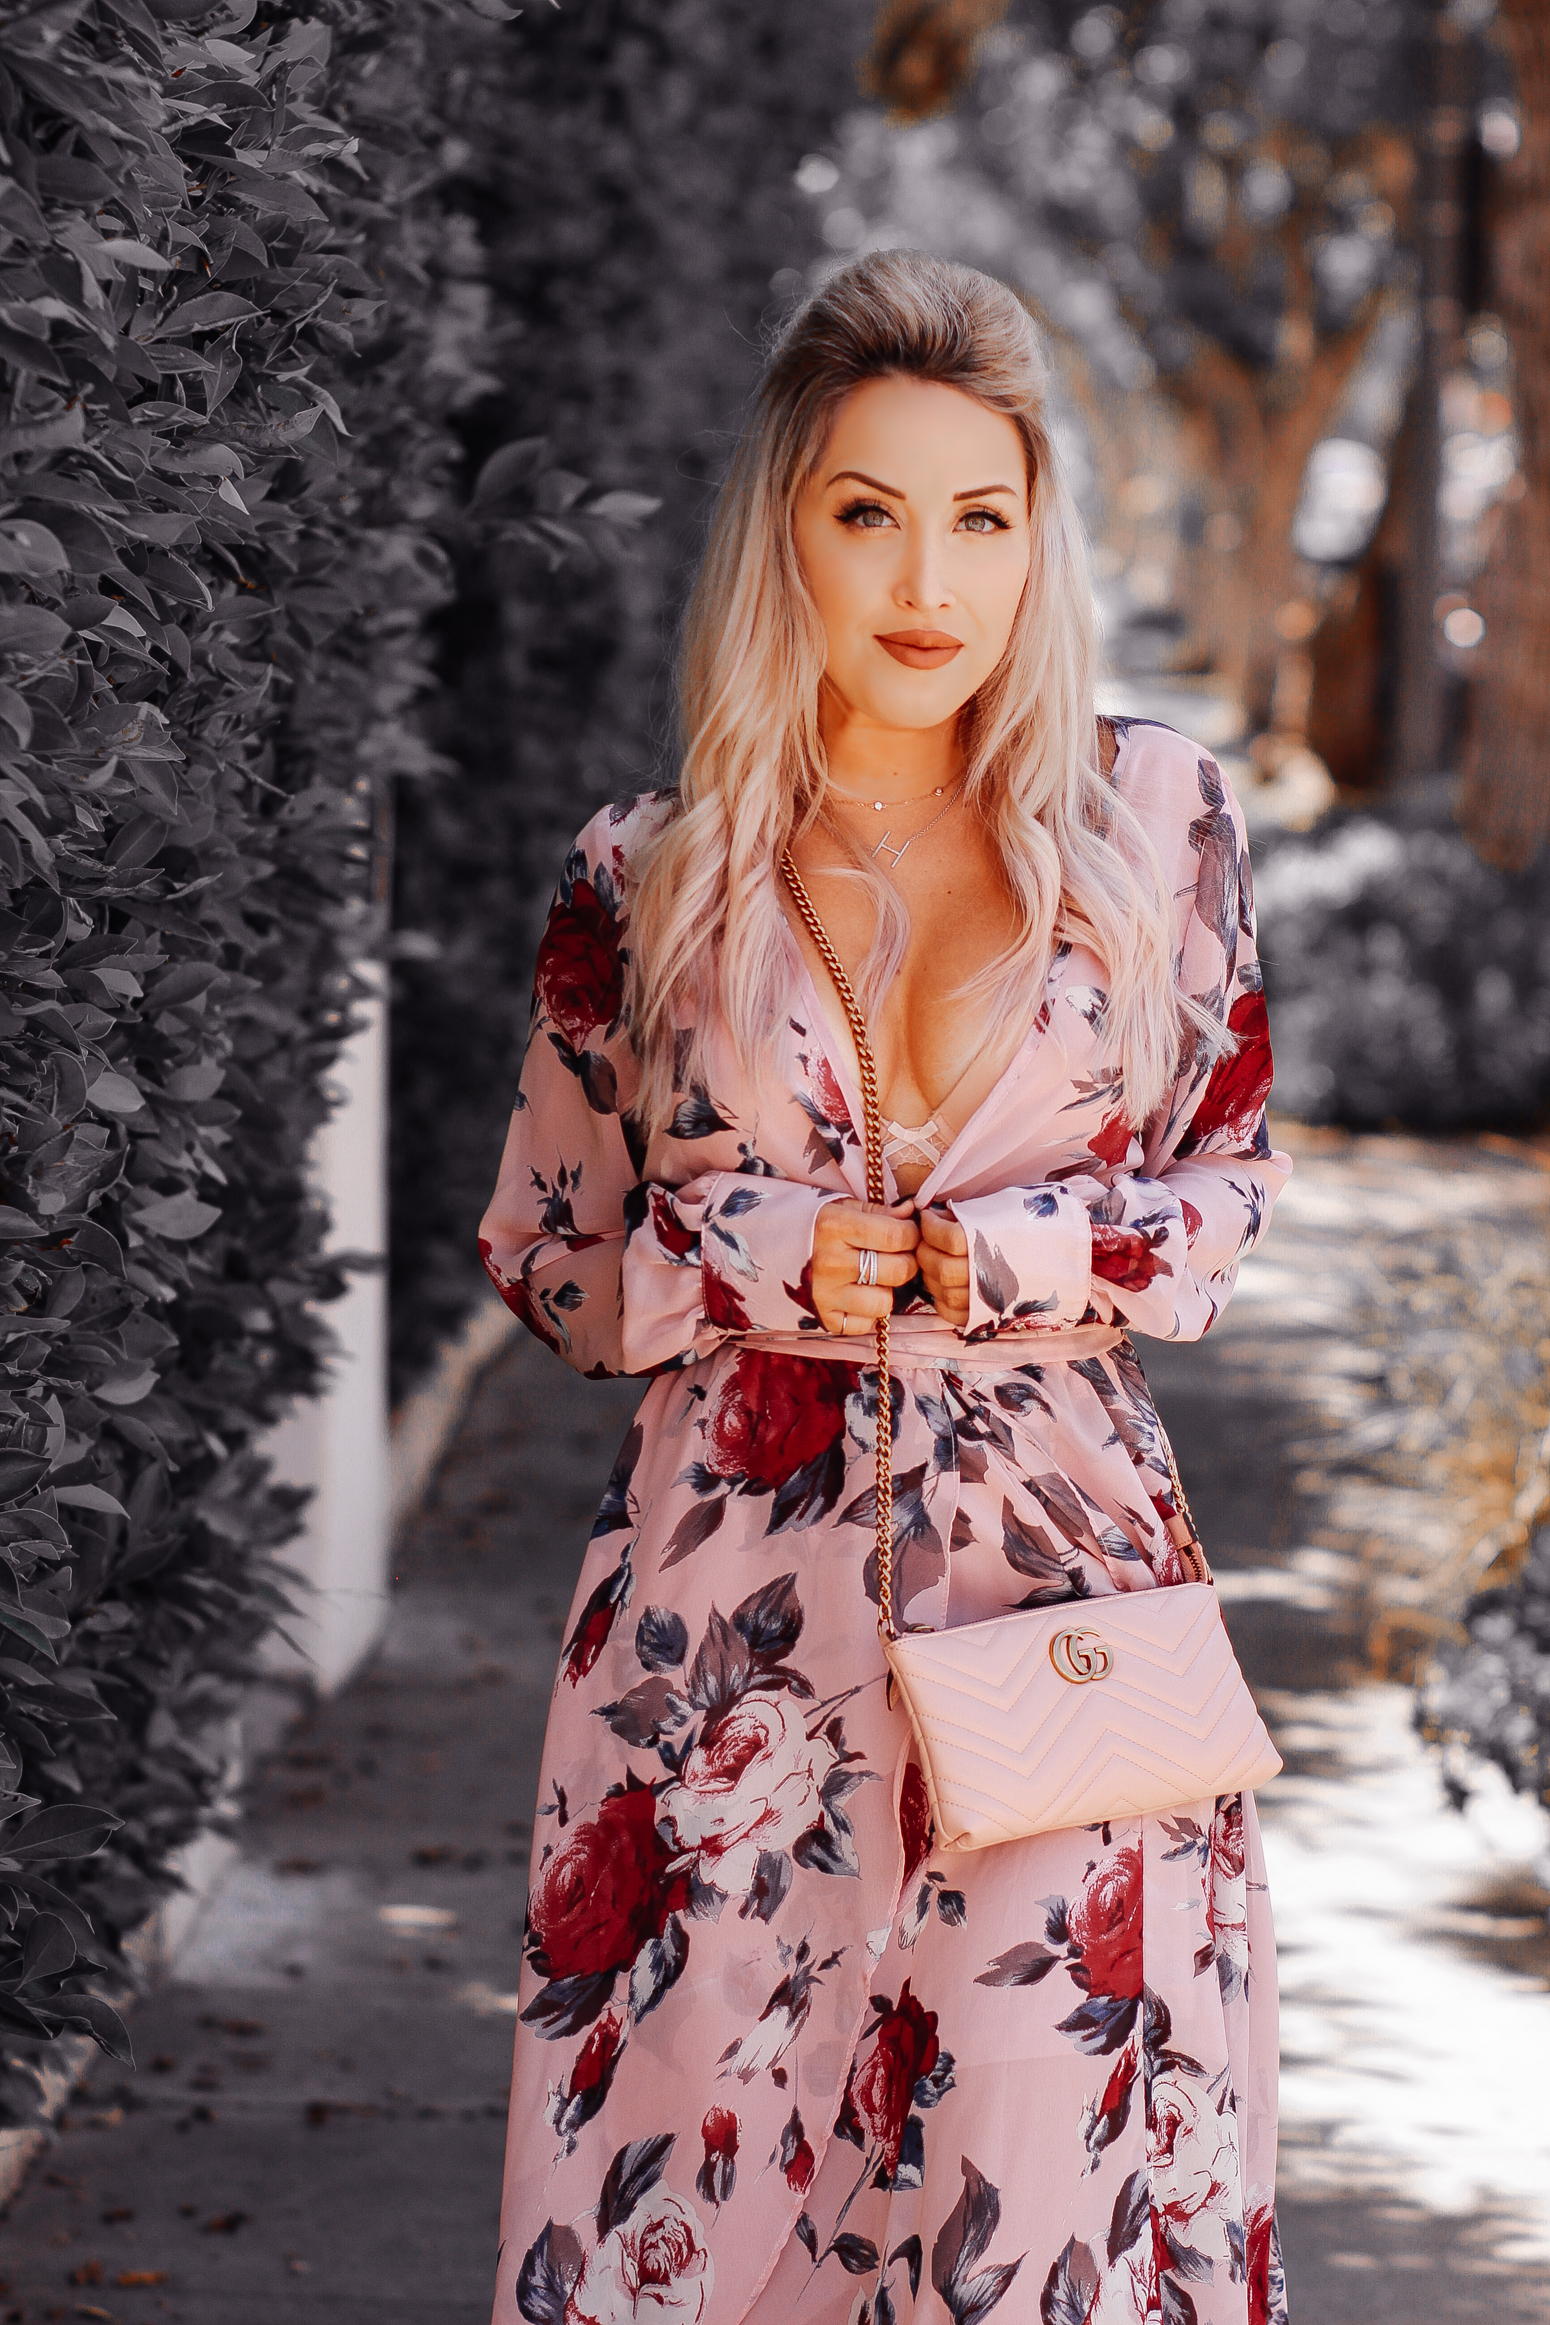 Blondie in the City | Pink & Rose Chiffon Dress | Pink Gucci Bag